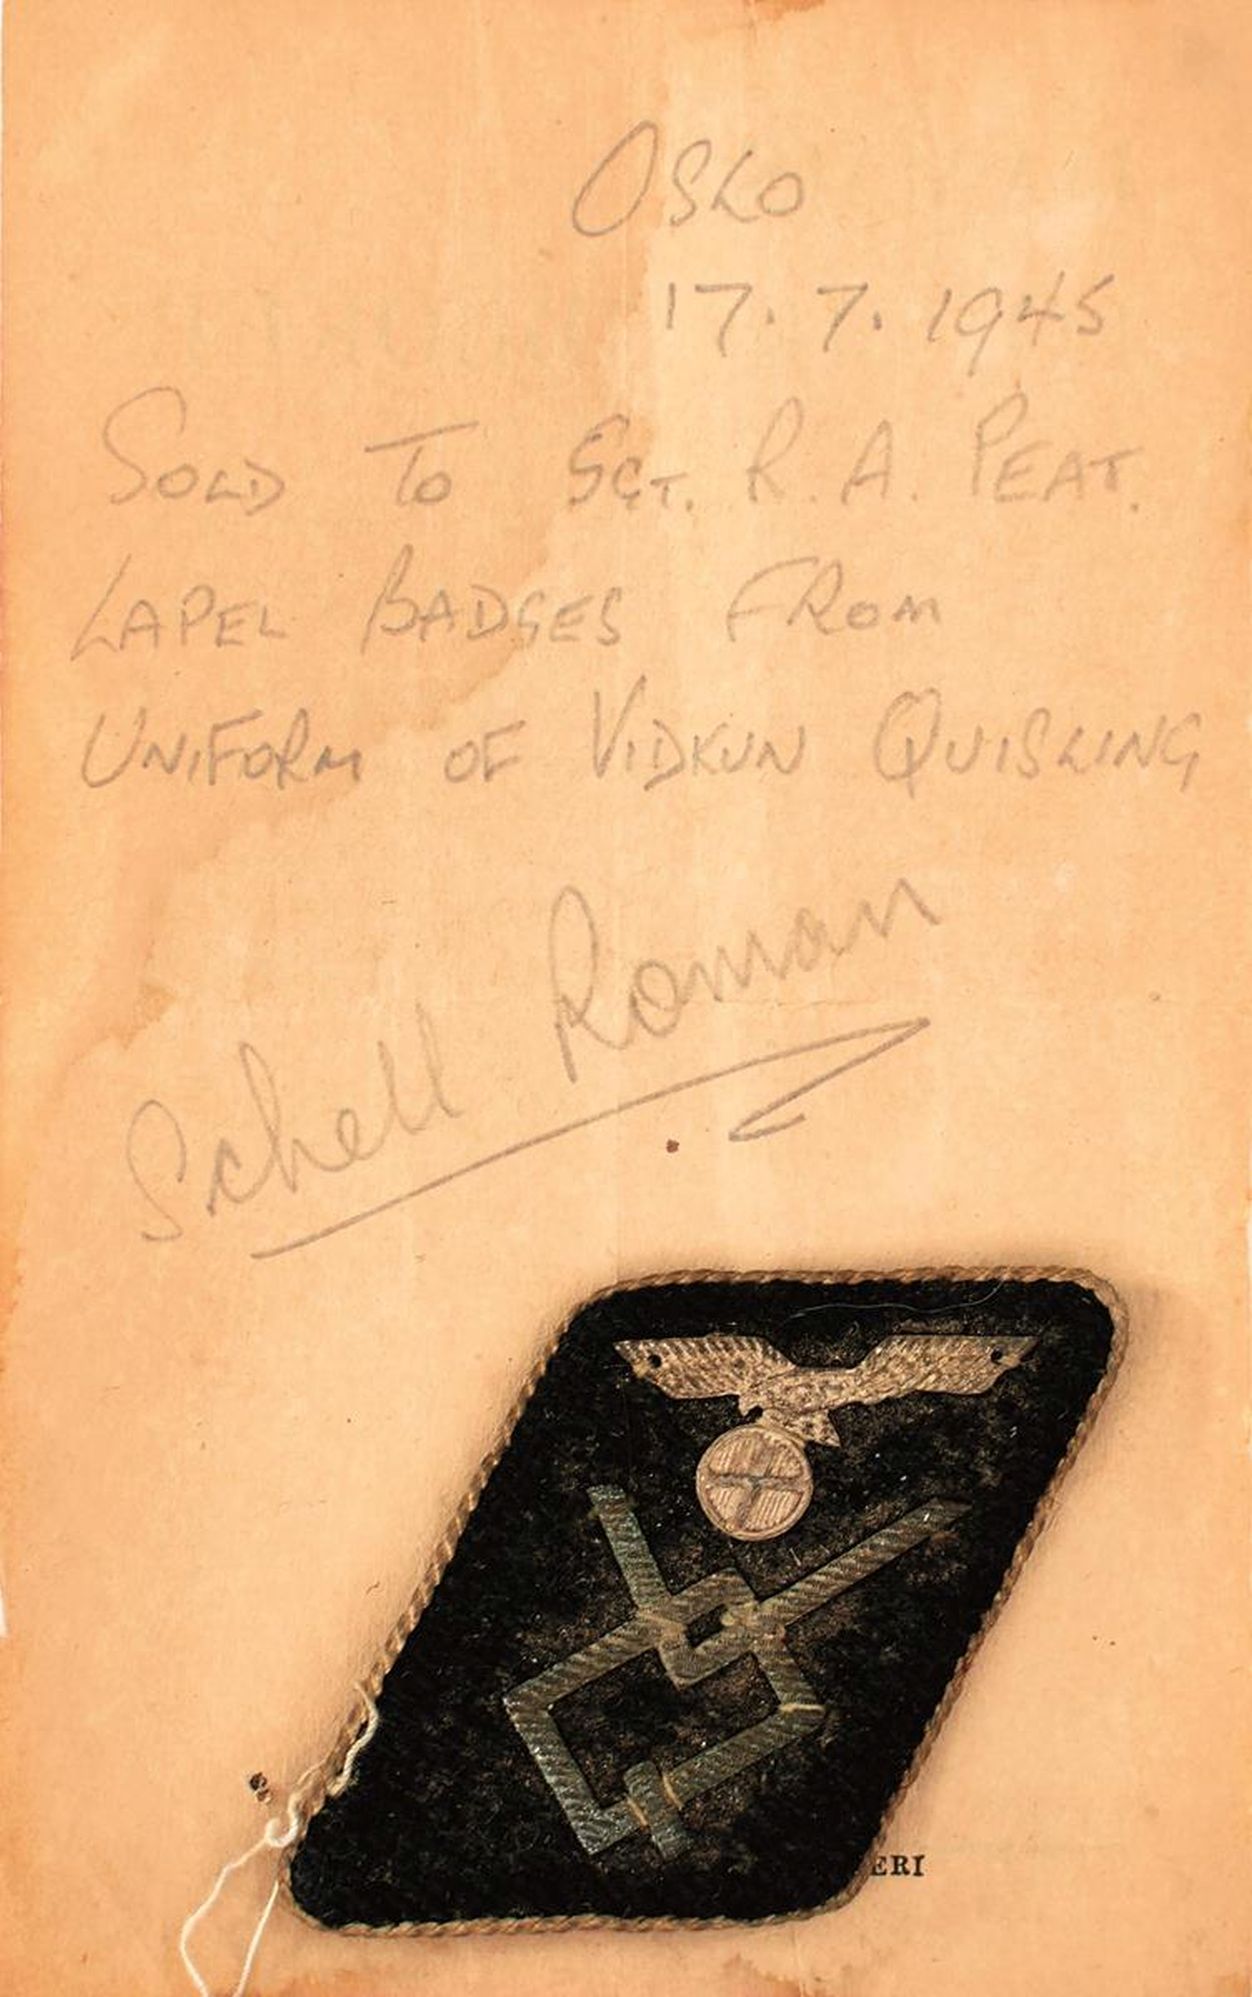 LAPEL BADGE INSIGNIA OF VIDKUN QUISLING, comprising one full collar tab, a backing plate and metal